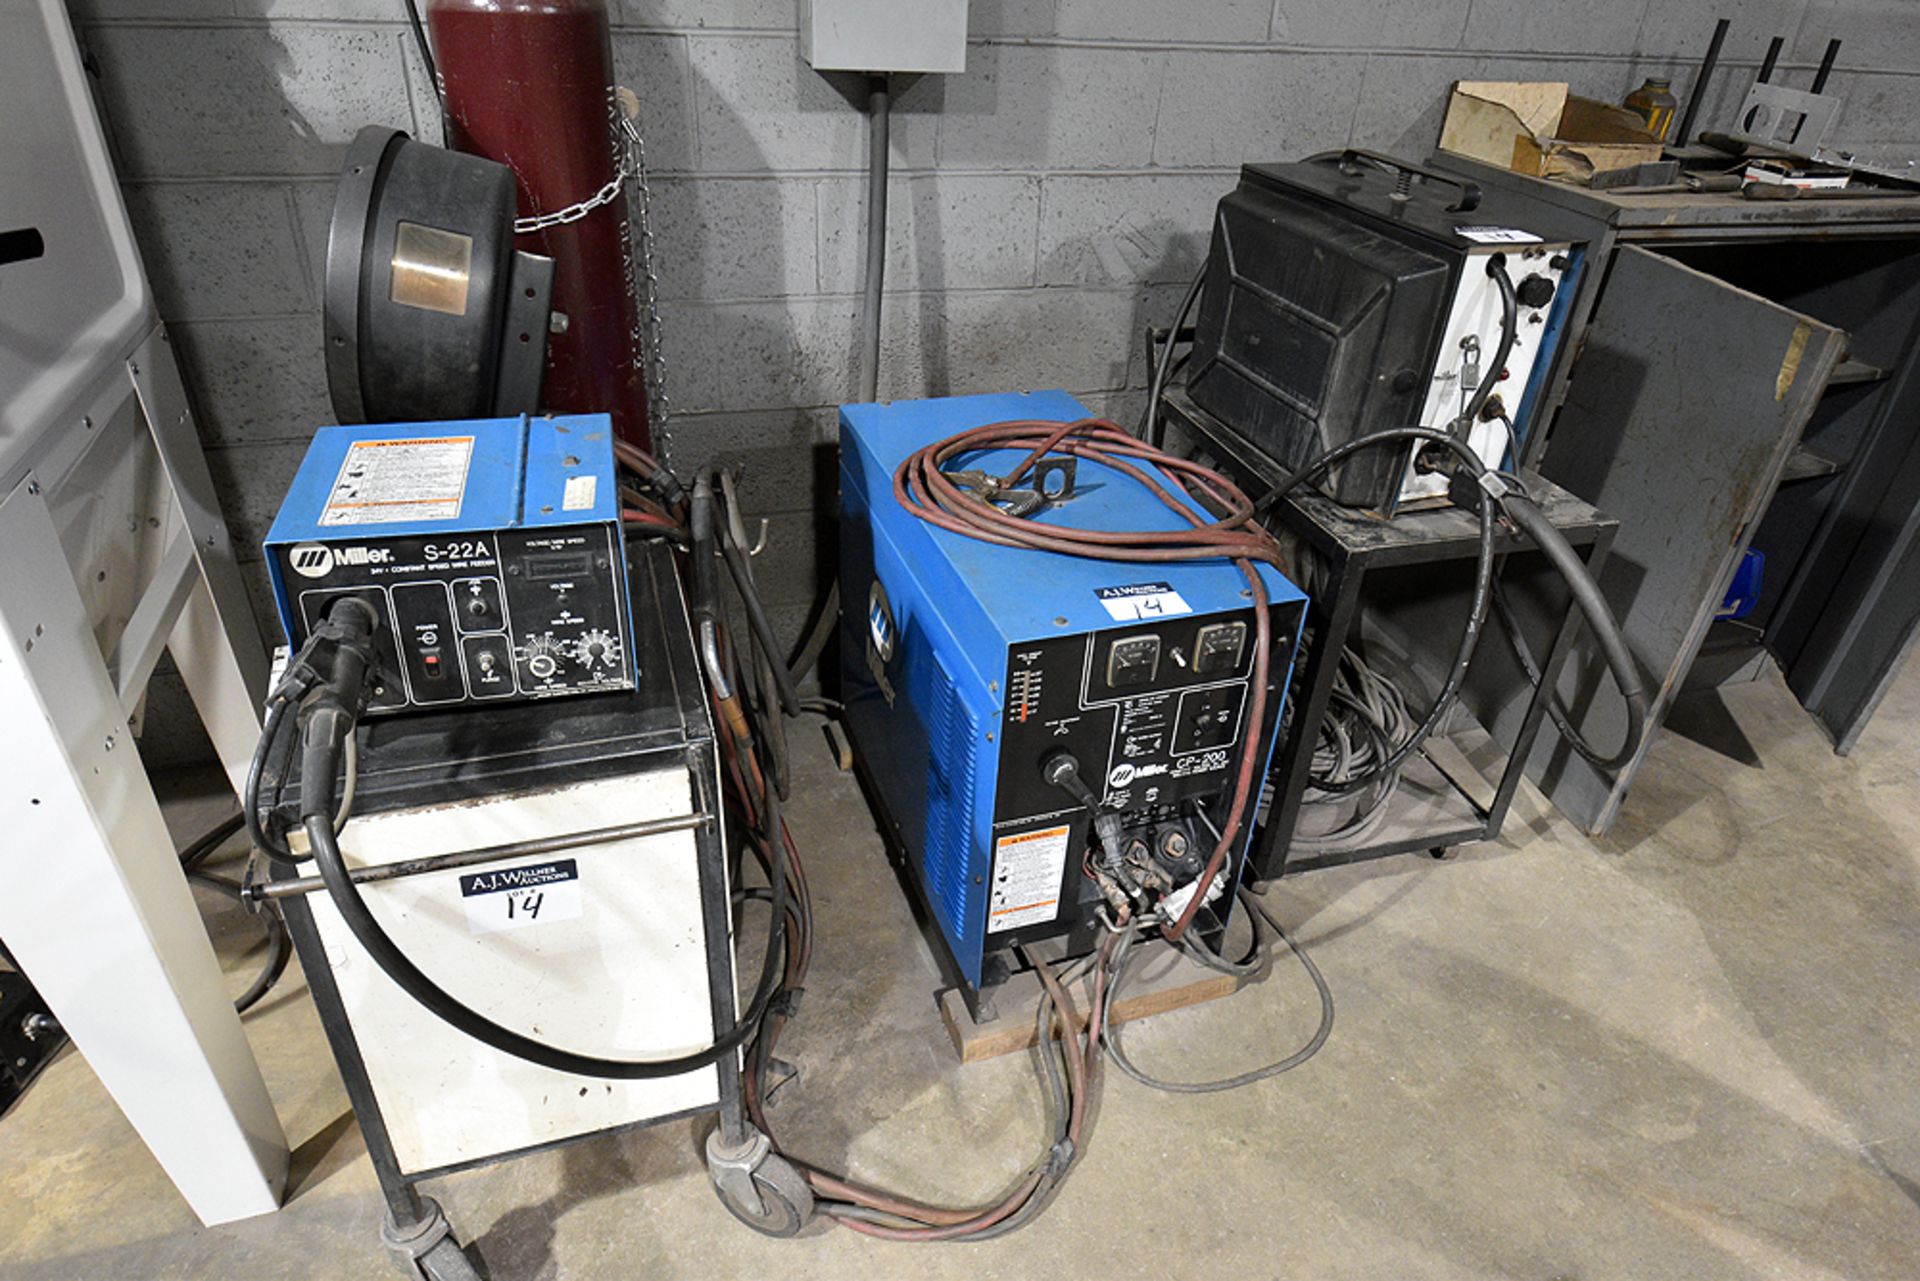 Miller Welding system consisting of: